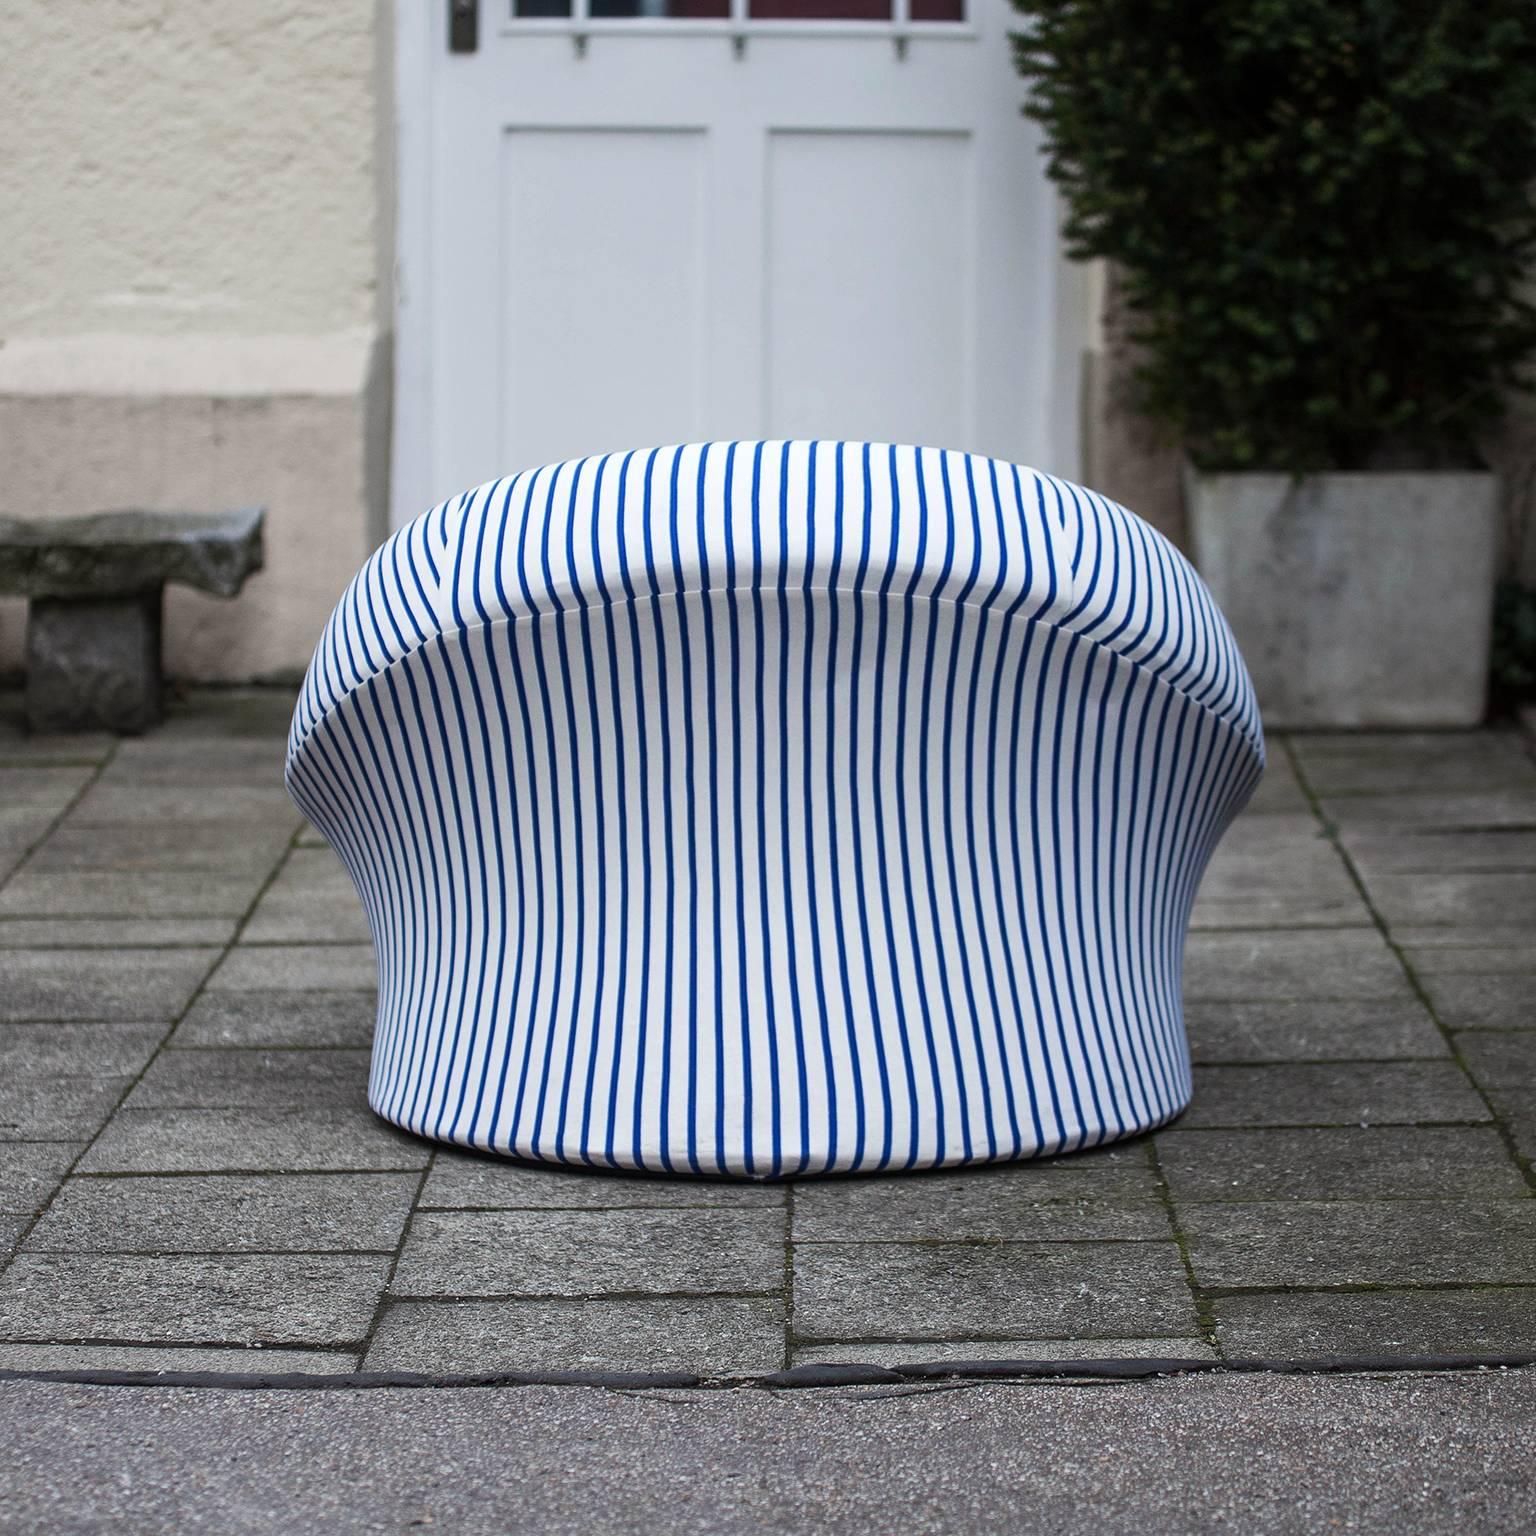 Gaetano Pesce UP3 chair
Early model for B & B Italia, Italy 1969.
Original corps made out of polyurethane foam.
New cover in inspired by Jaen Paul Gautier. Elastic cotton fabric in blue/white.
Goes perfect with the Djinn-chair.
Measures: W: